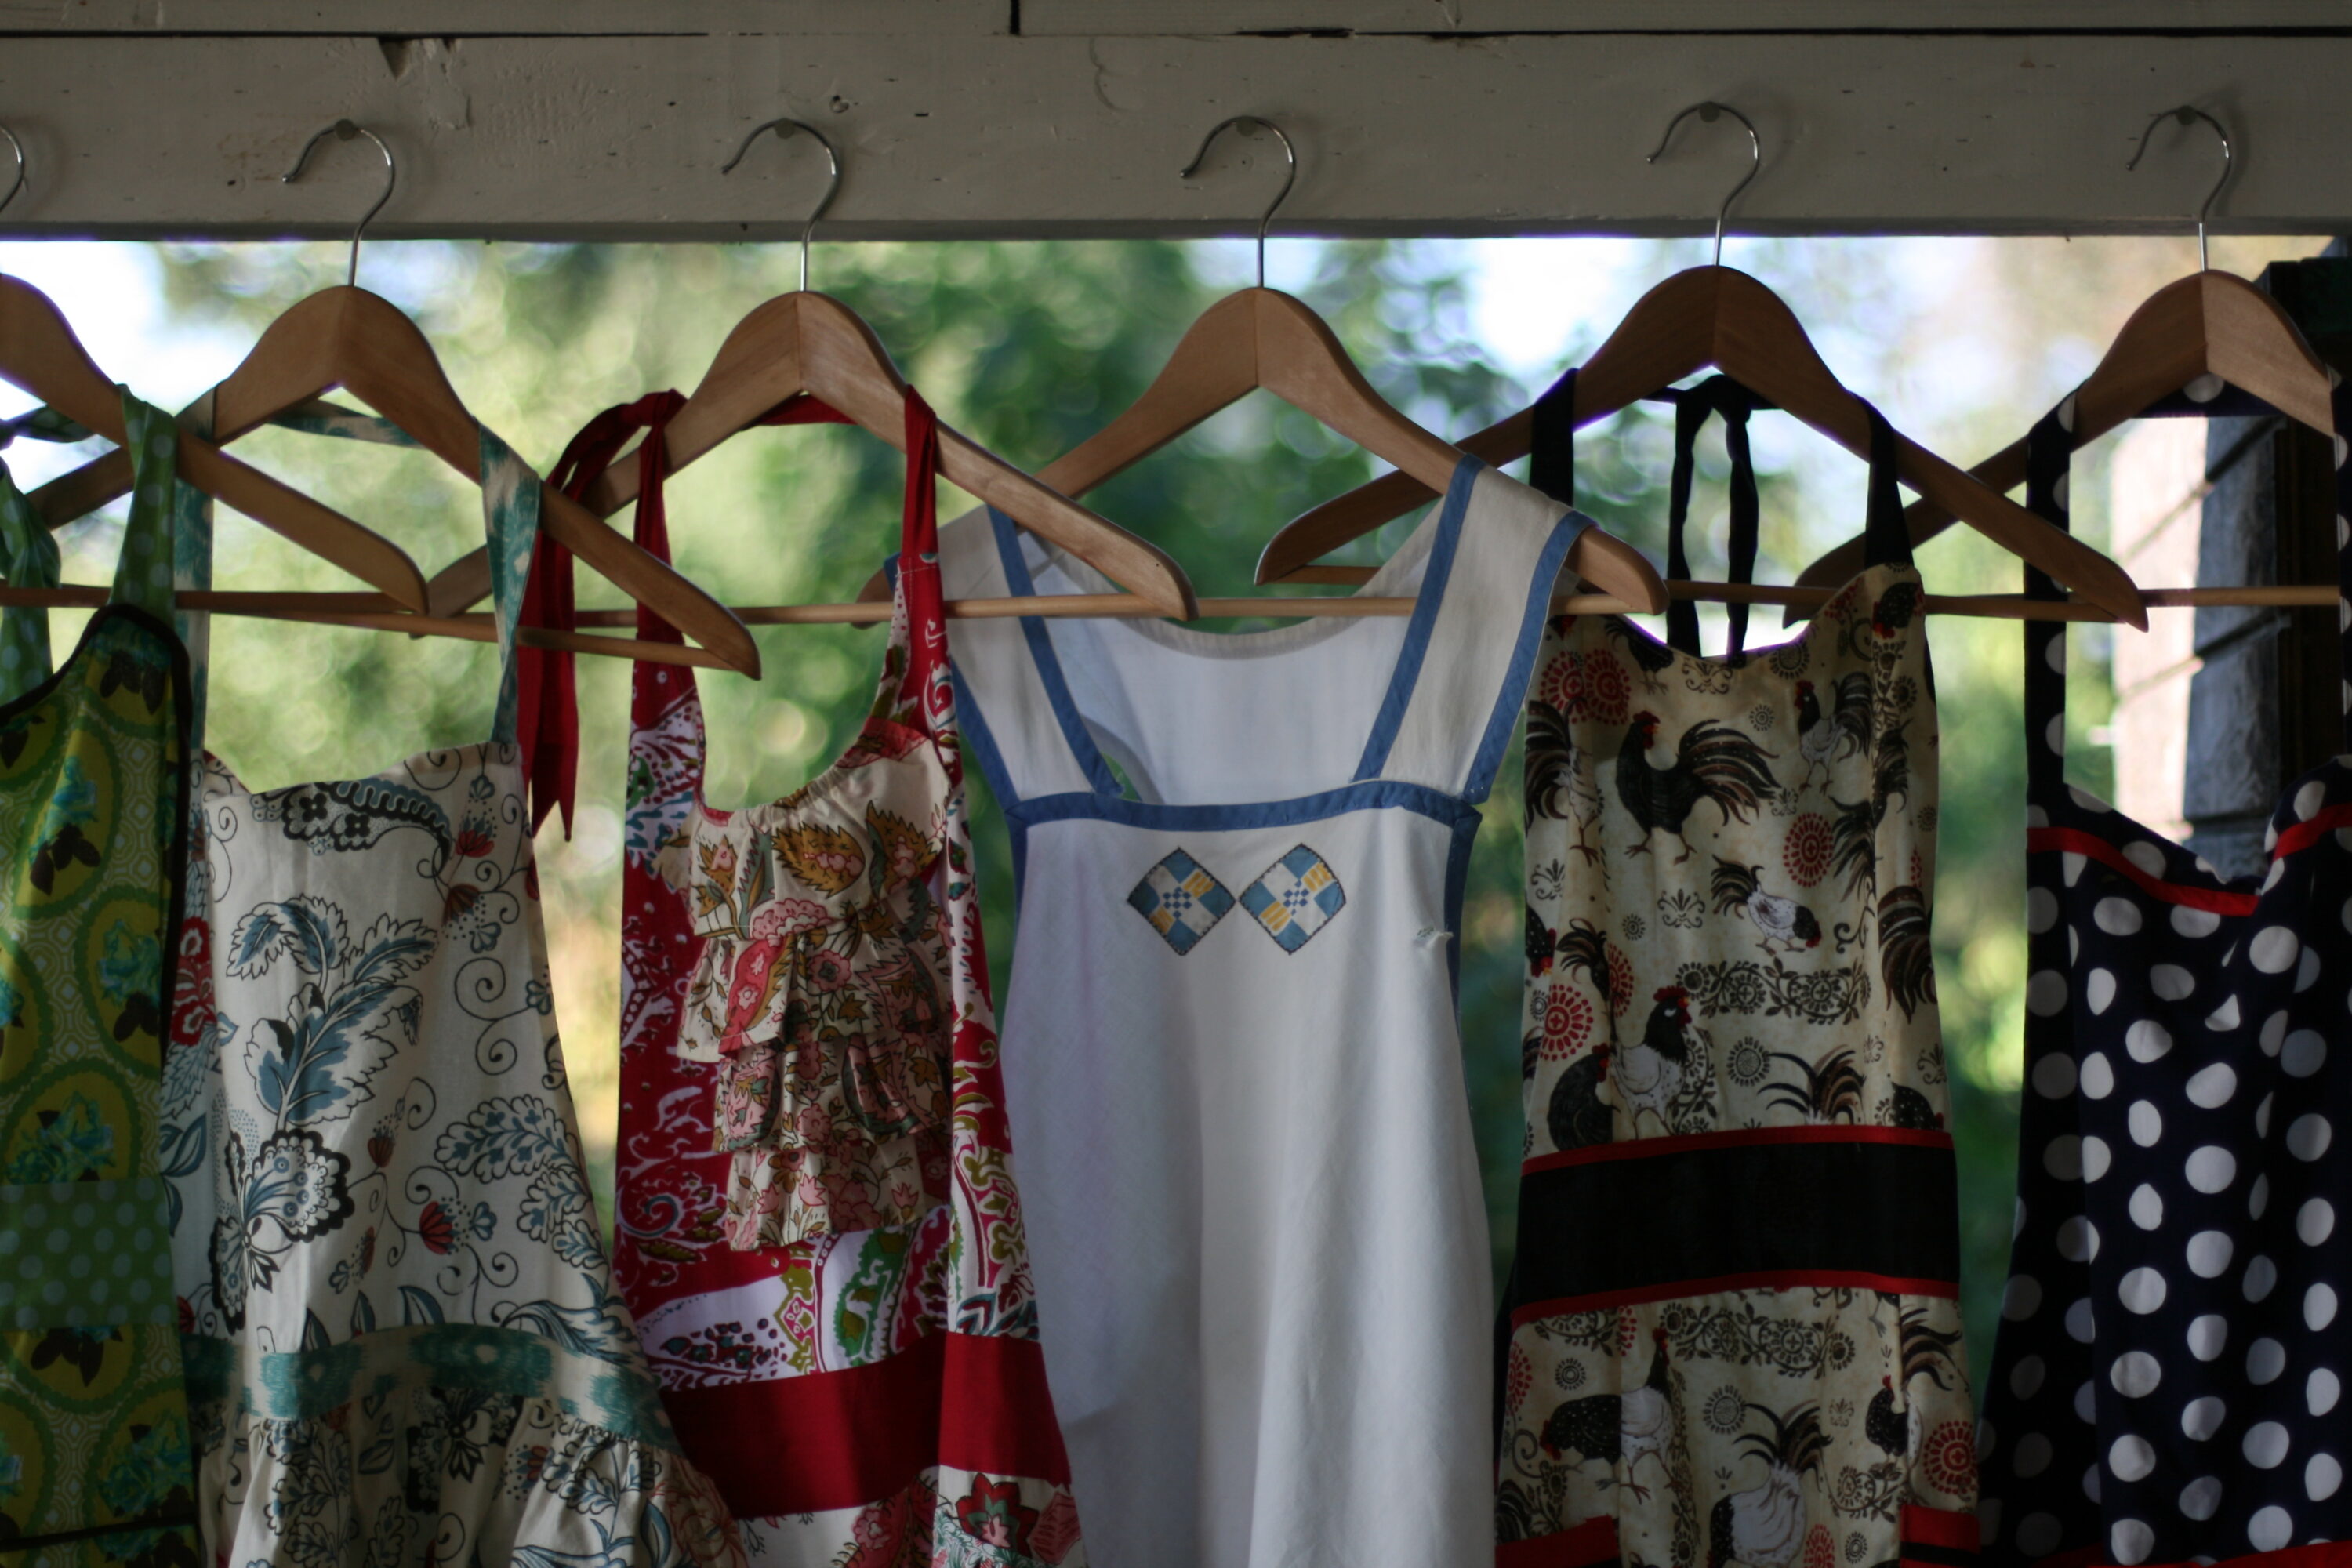 Aprons on hangers